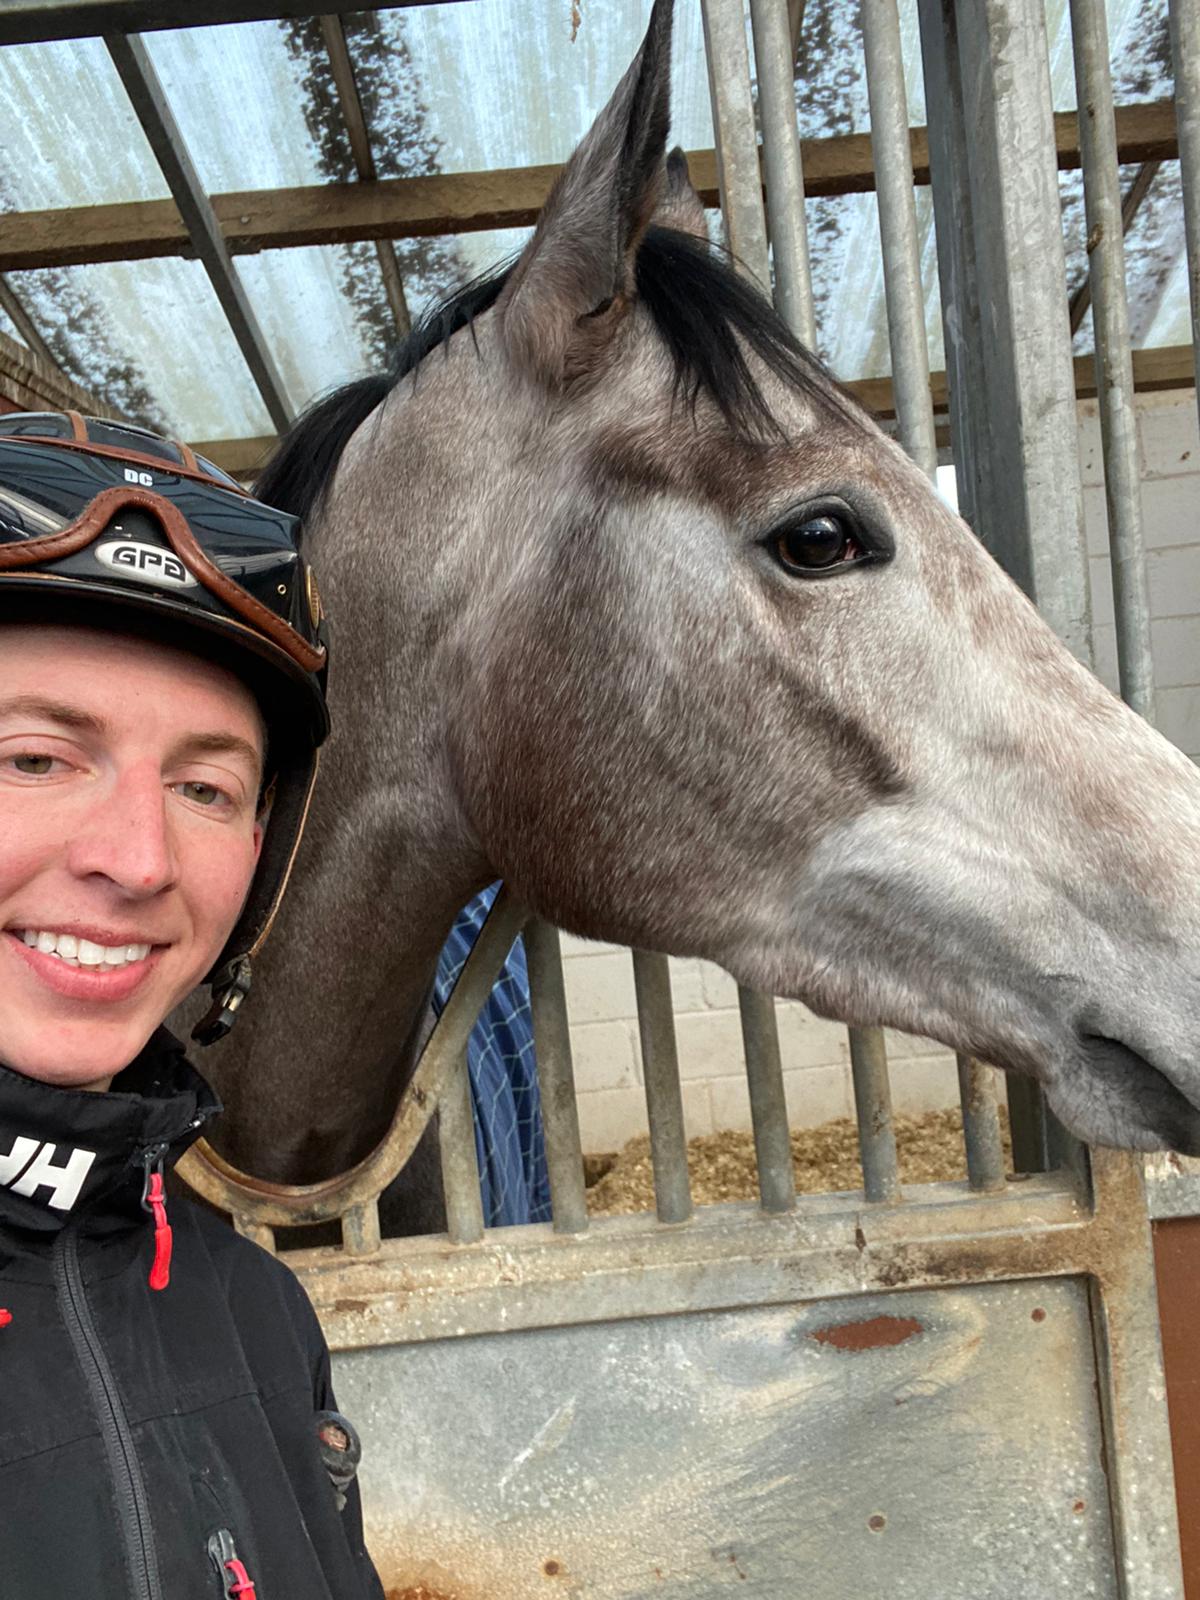 Selfie time: Declan Carroll with Listed winner Juncture at Ger Lyons’s yard.